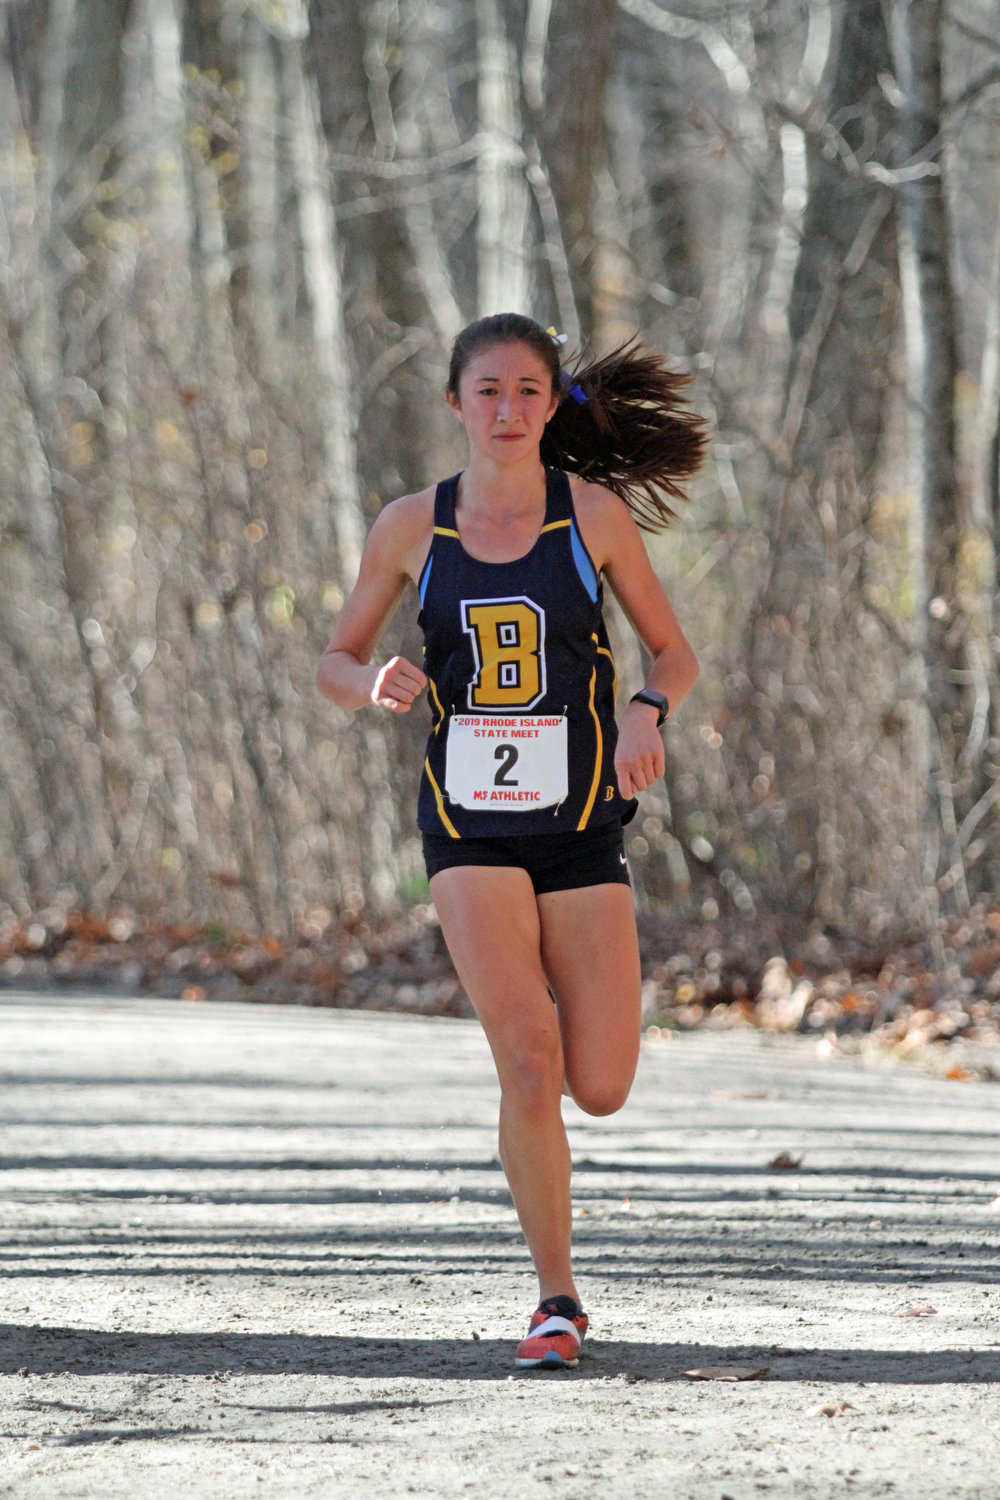 Barrington High School's Stephanie Chun competes in the state cross country meet on Saturday. Stephanie finished fourth overall and the Barrington girls team finished second.